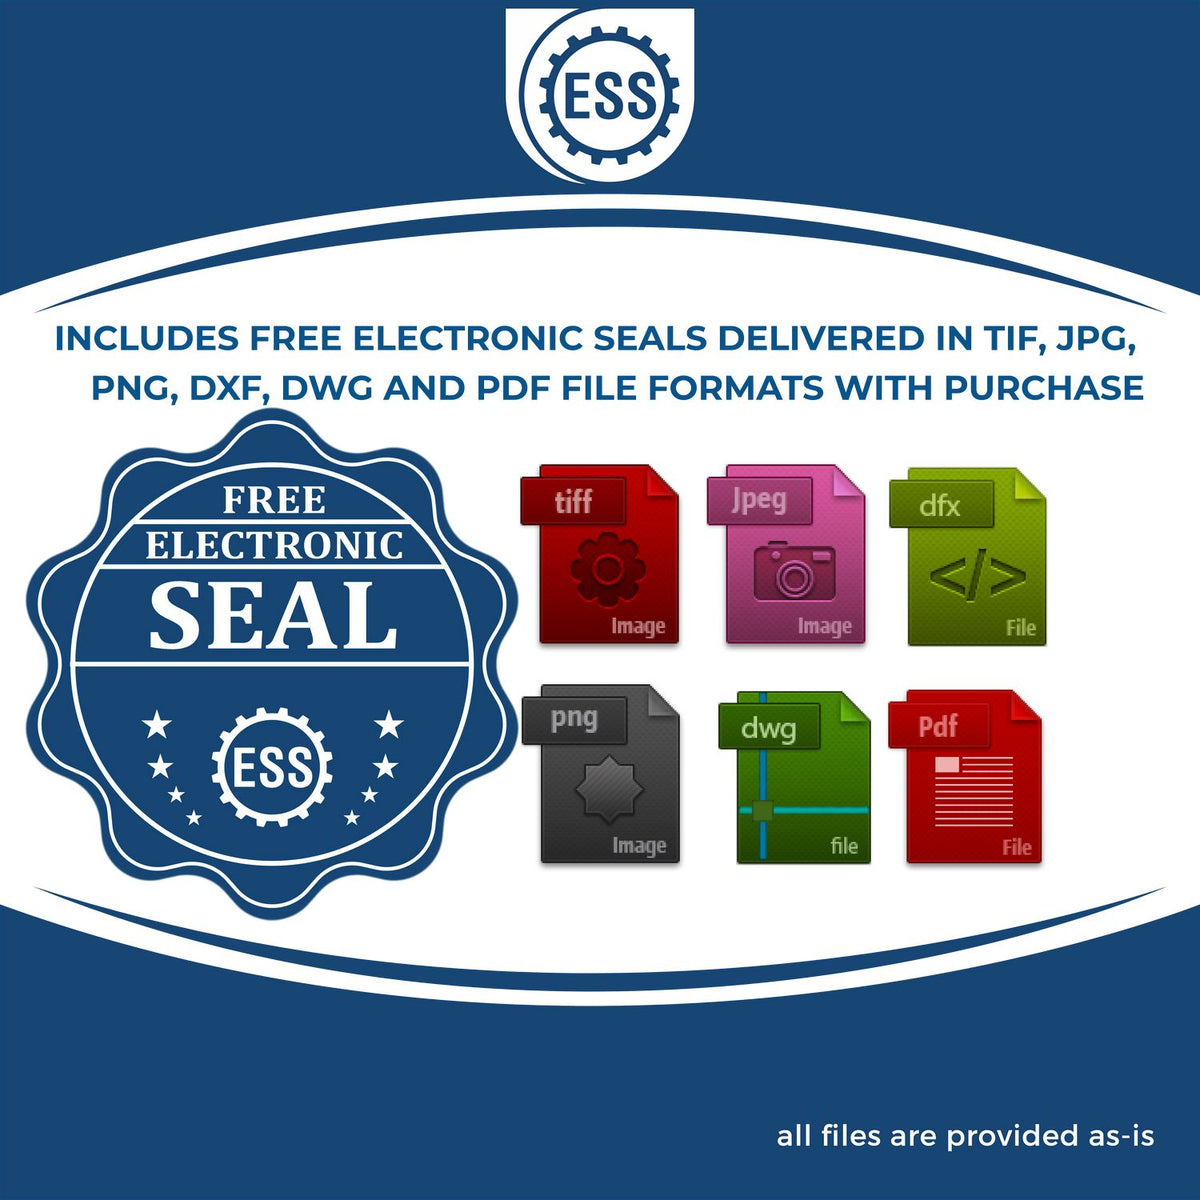 An infographic for the free electronic seal for the Heavy Duty Cast Iron Georgia Engineer Seal Embosser illustrating the different file type icons such as DXF, DWG, TIF, JPG and PNG.